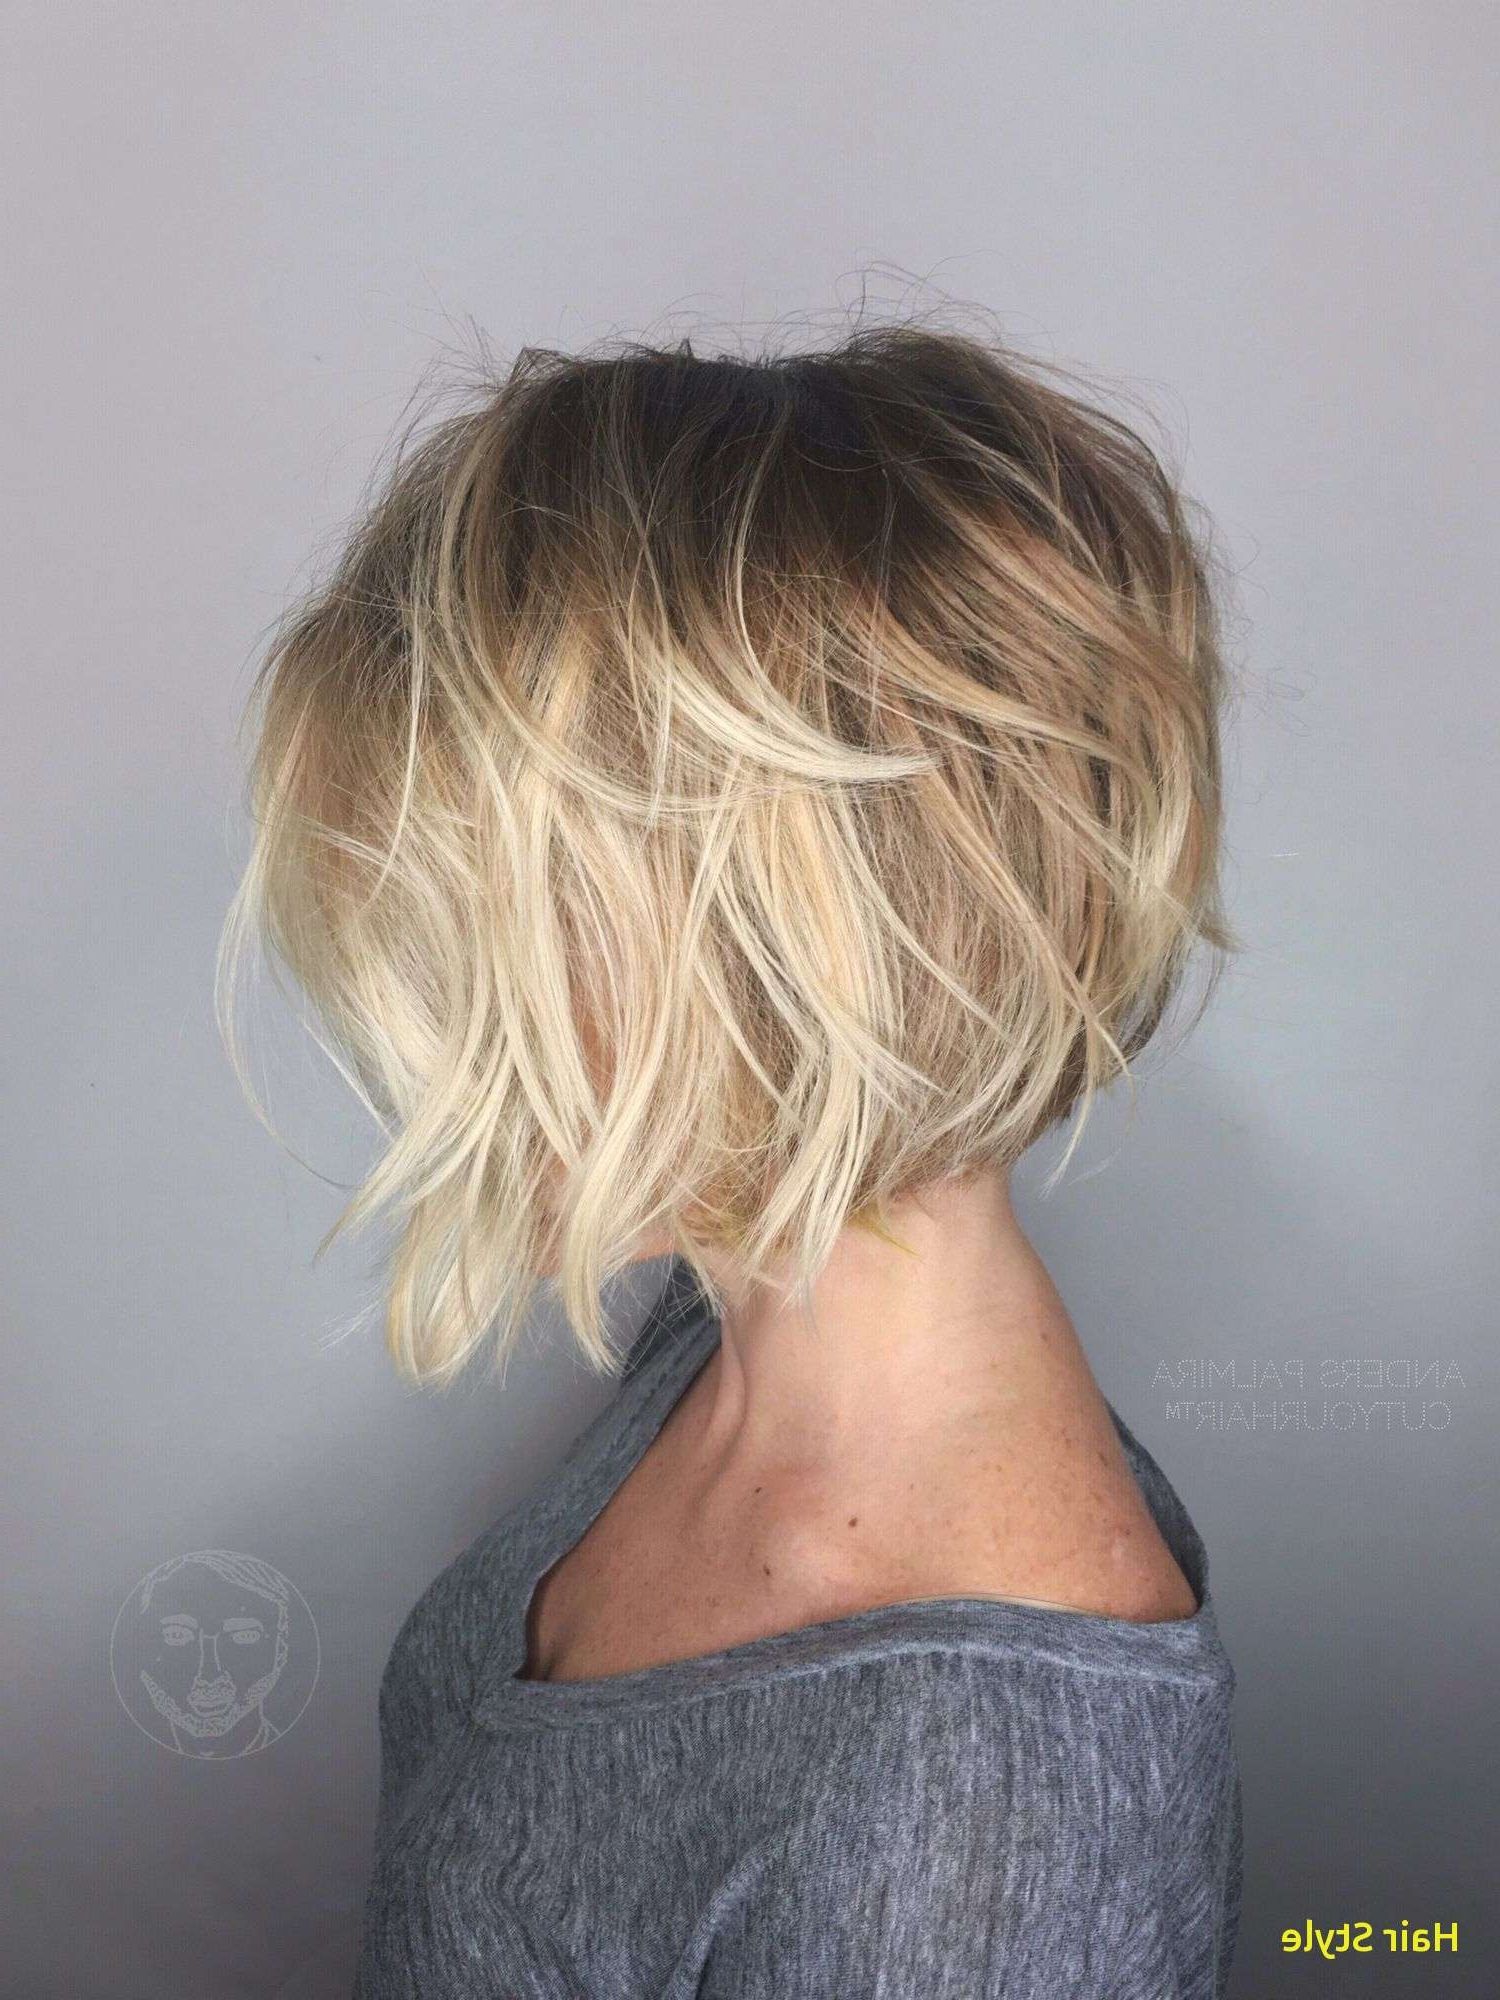 Straight Bob Hairstyles Inspirational Aveda Wavy Long Blonde Bob Pertaining To Most Recent Wavy Blonde Bob Hairstyles (View 6 of 20)